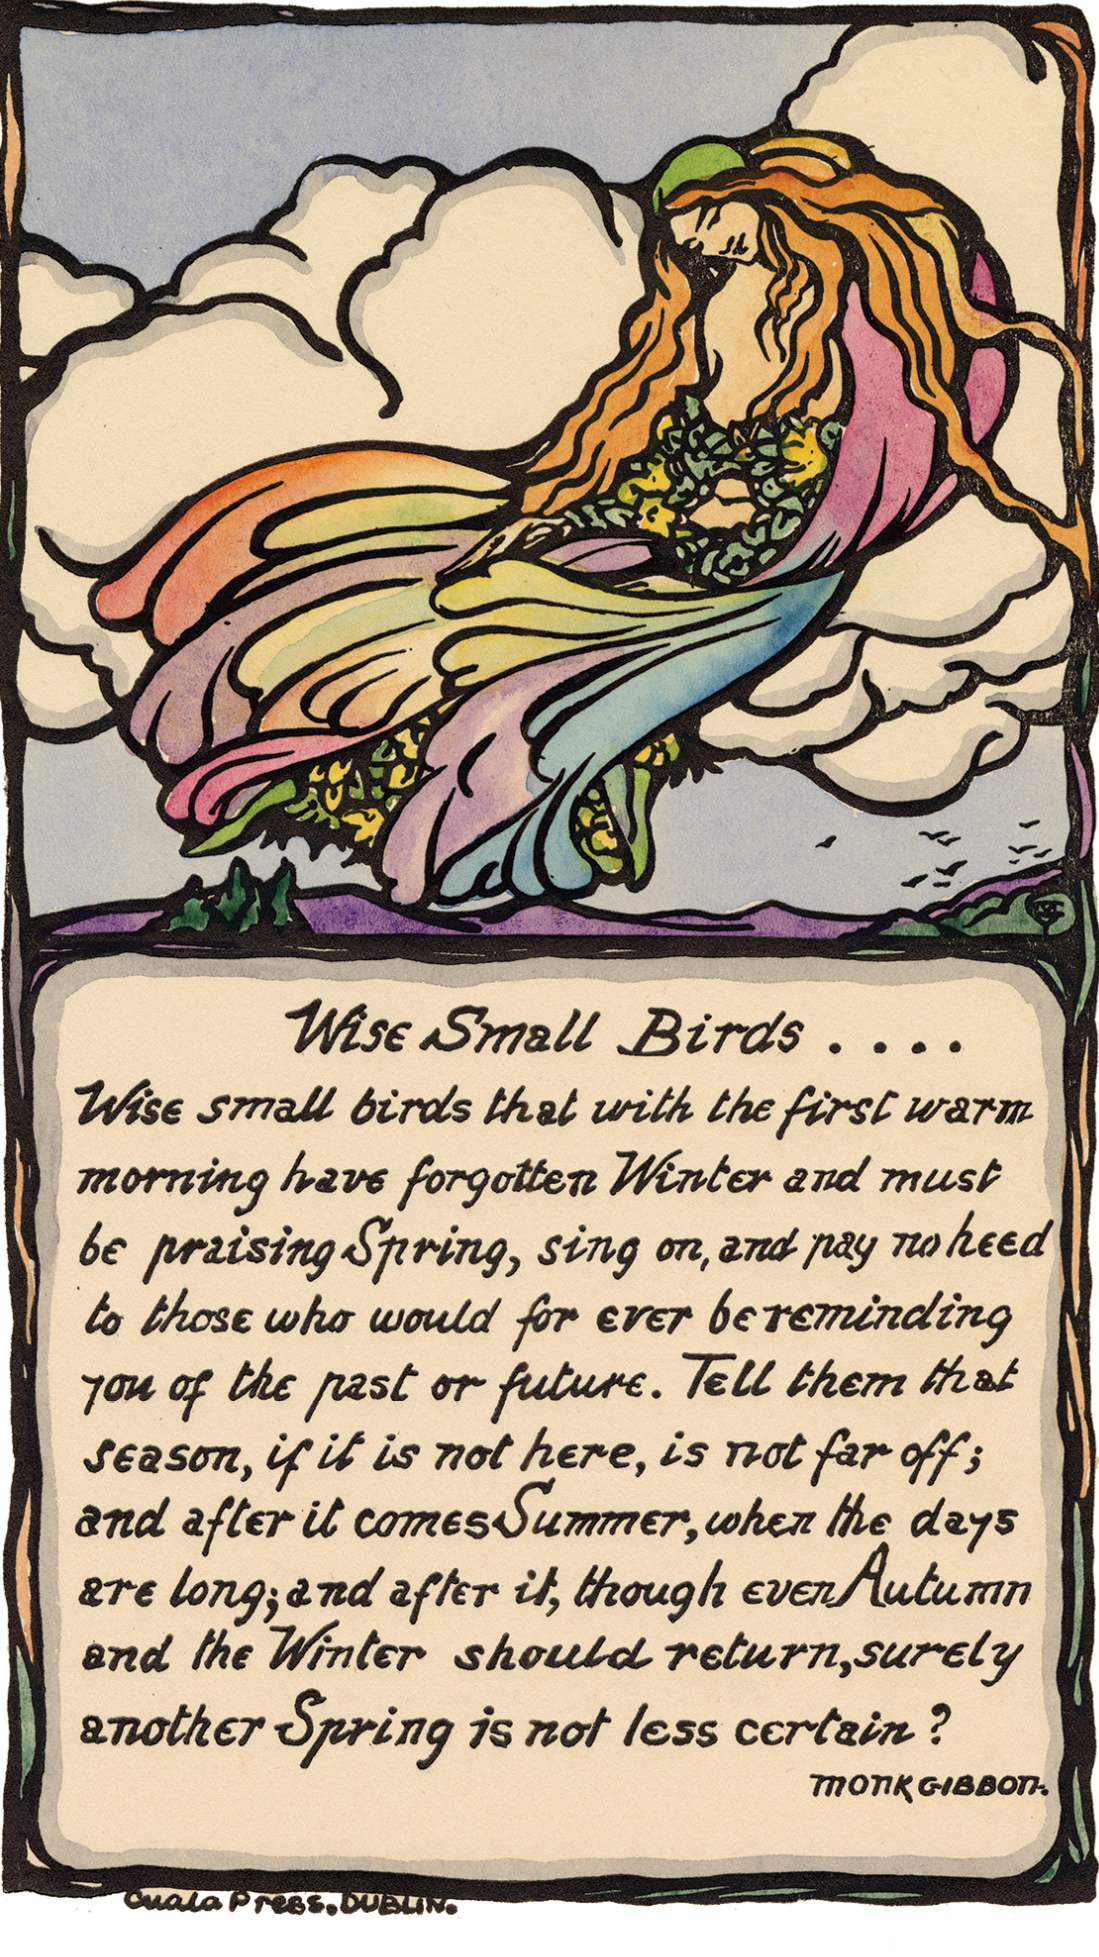 Woodblock print of a figure with long orange hair and rainbow-colored garments floating among the clouds. Under the illustration is a poem titled "Wise Small Birds."